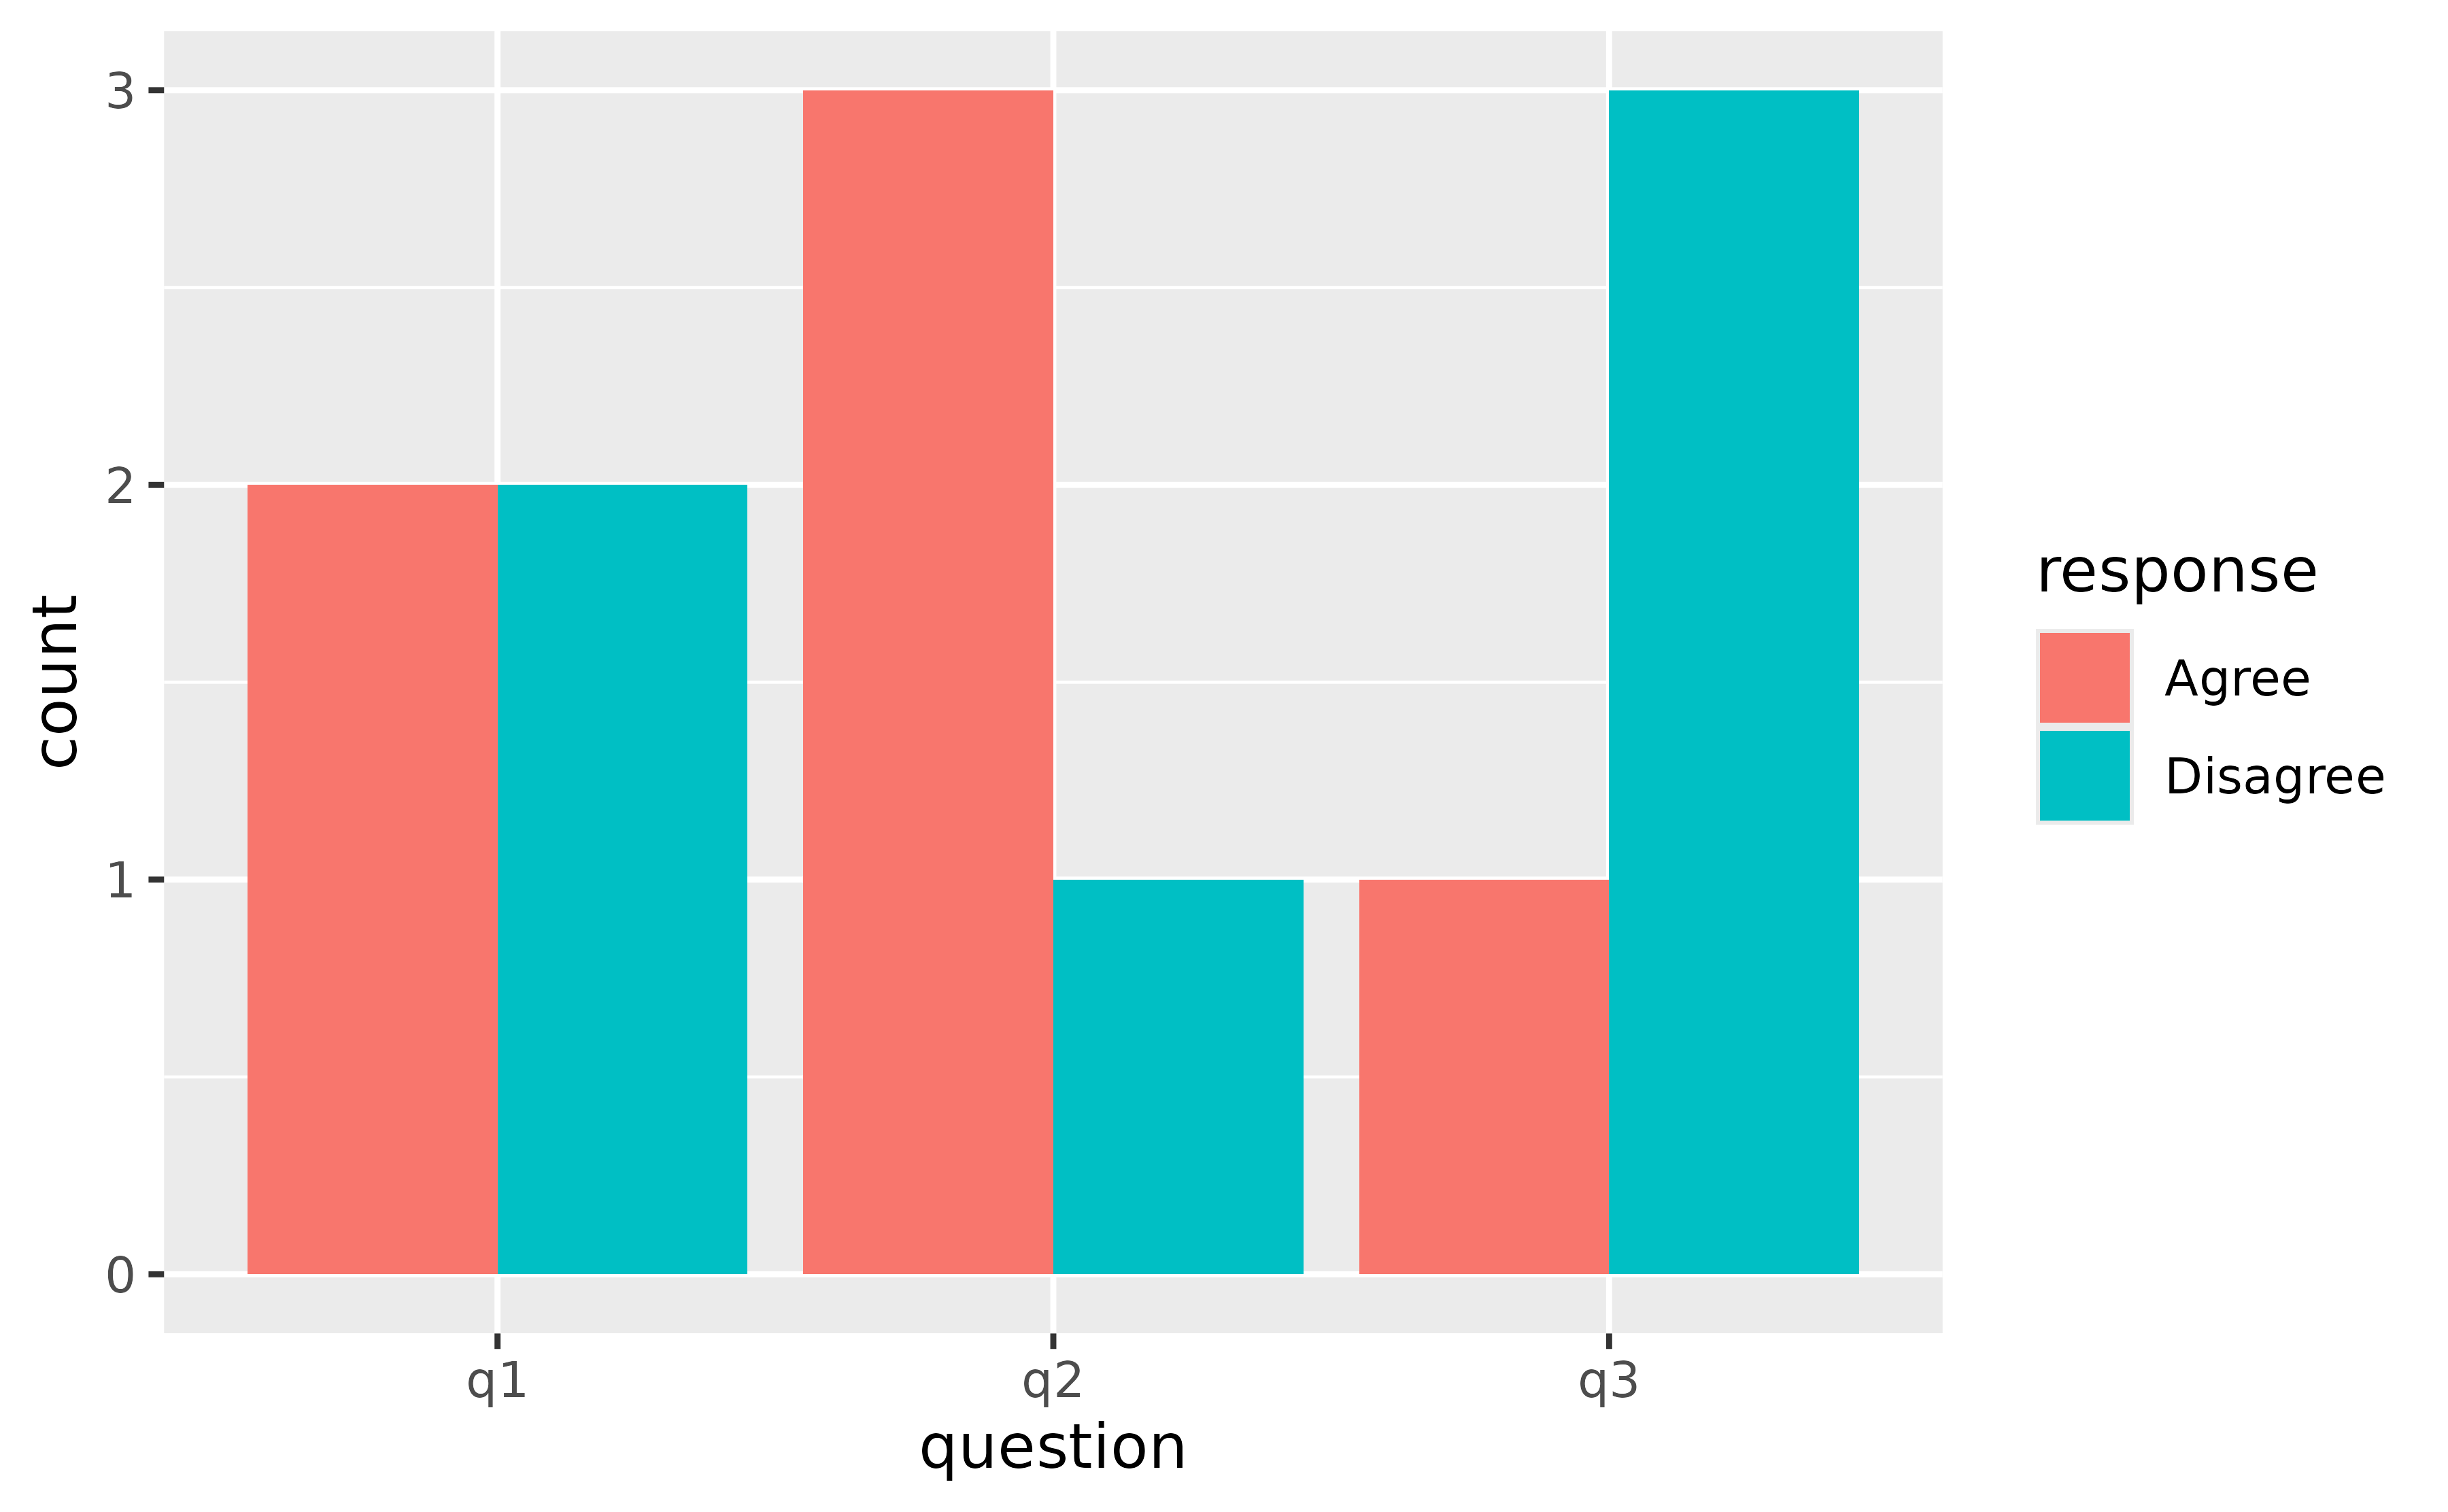 A grouped bar chart showing the number of responses to three questions. Within each question, two bars denote an 'Agree' or 'Disagree' response.